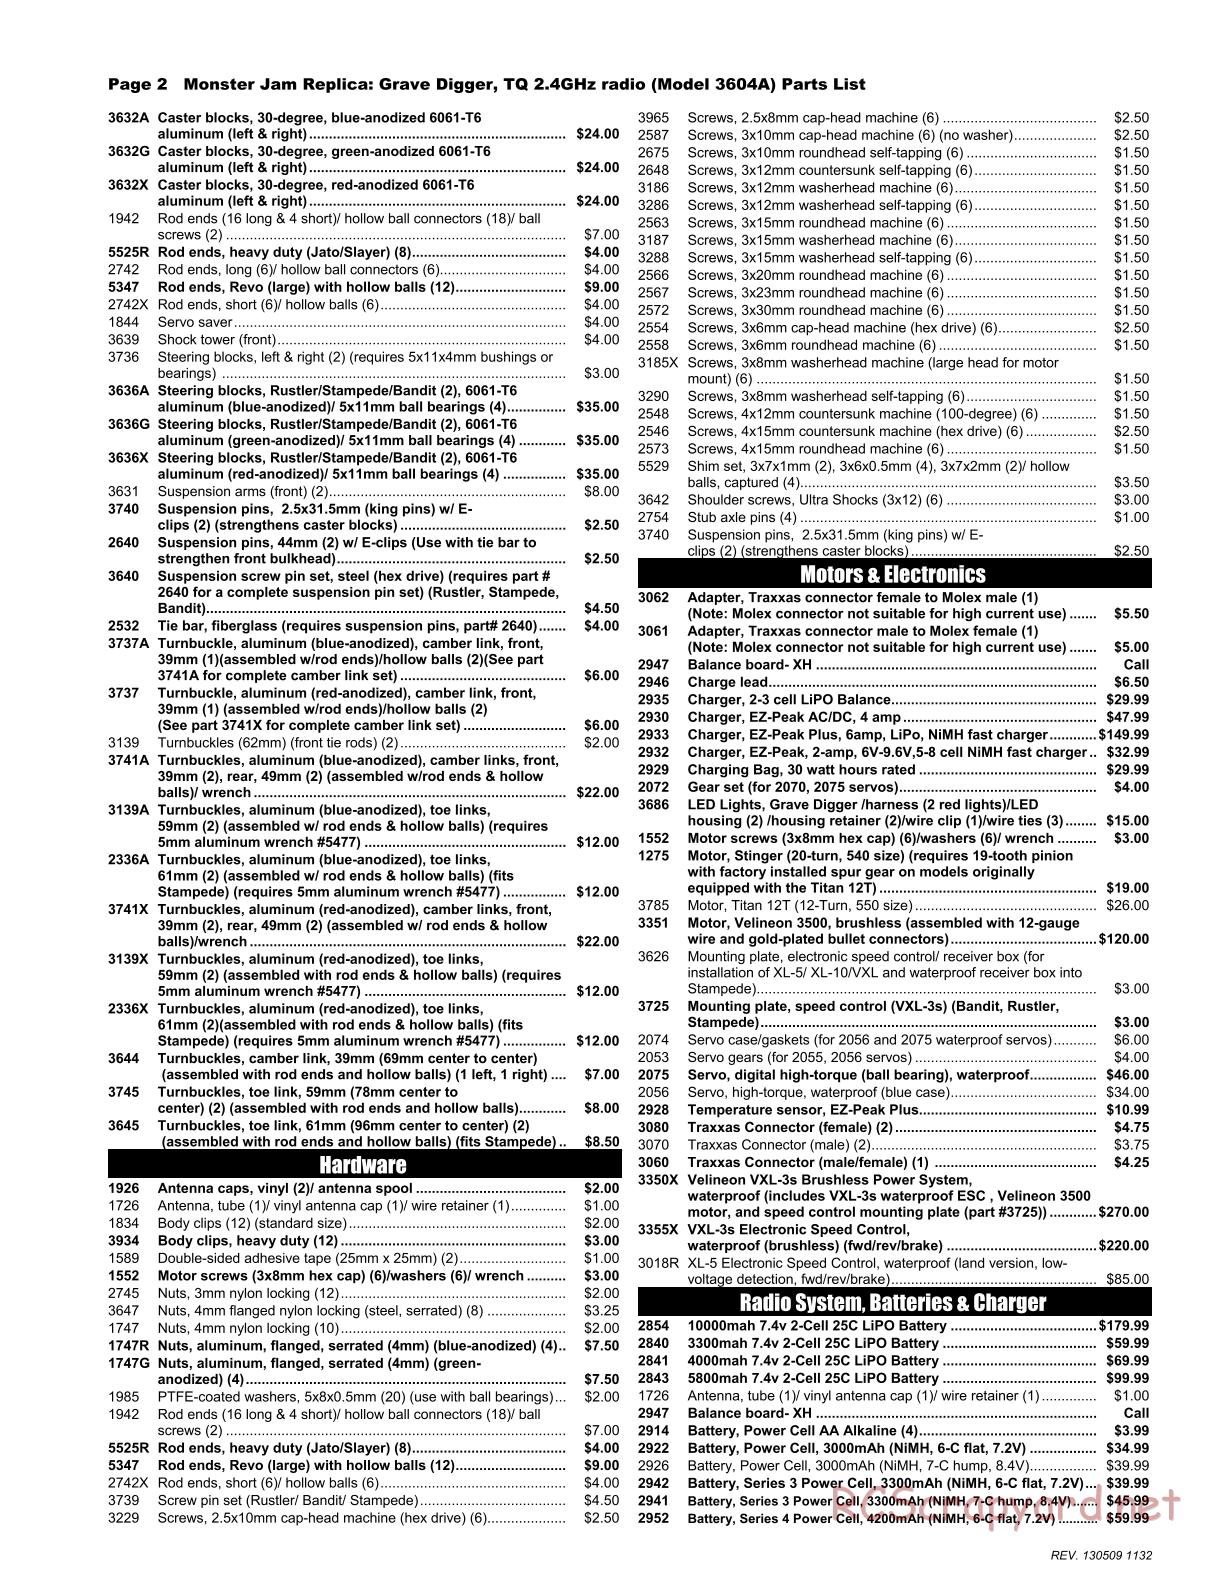 Traxxas - Monster Jam - Grave Digger - Parts List - Page 2